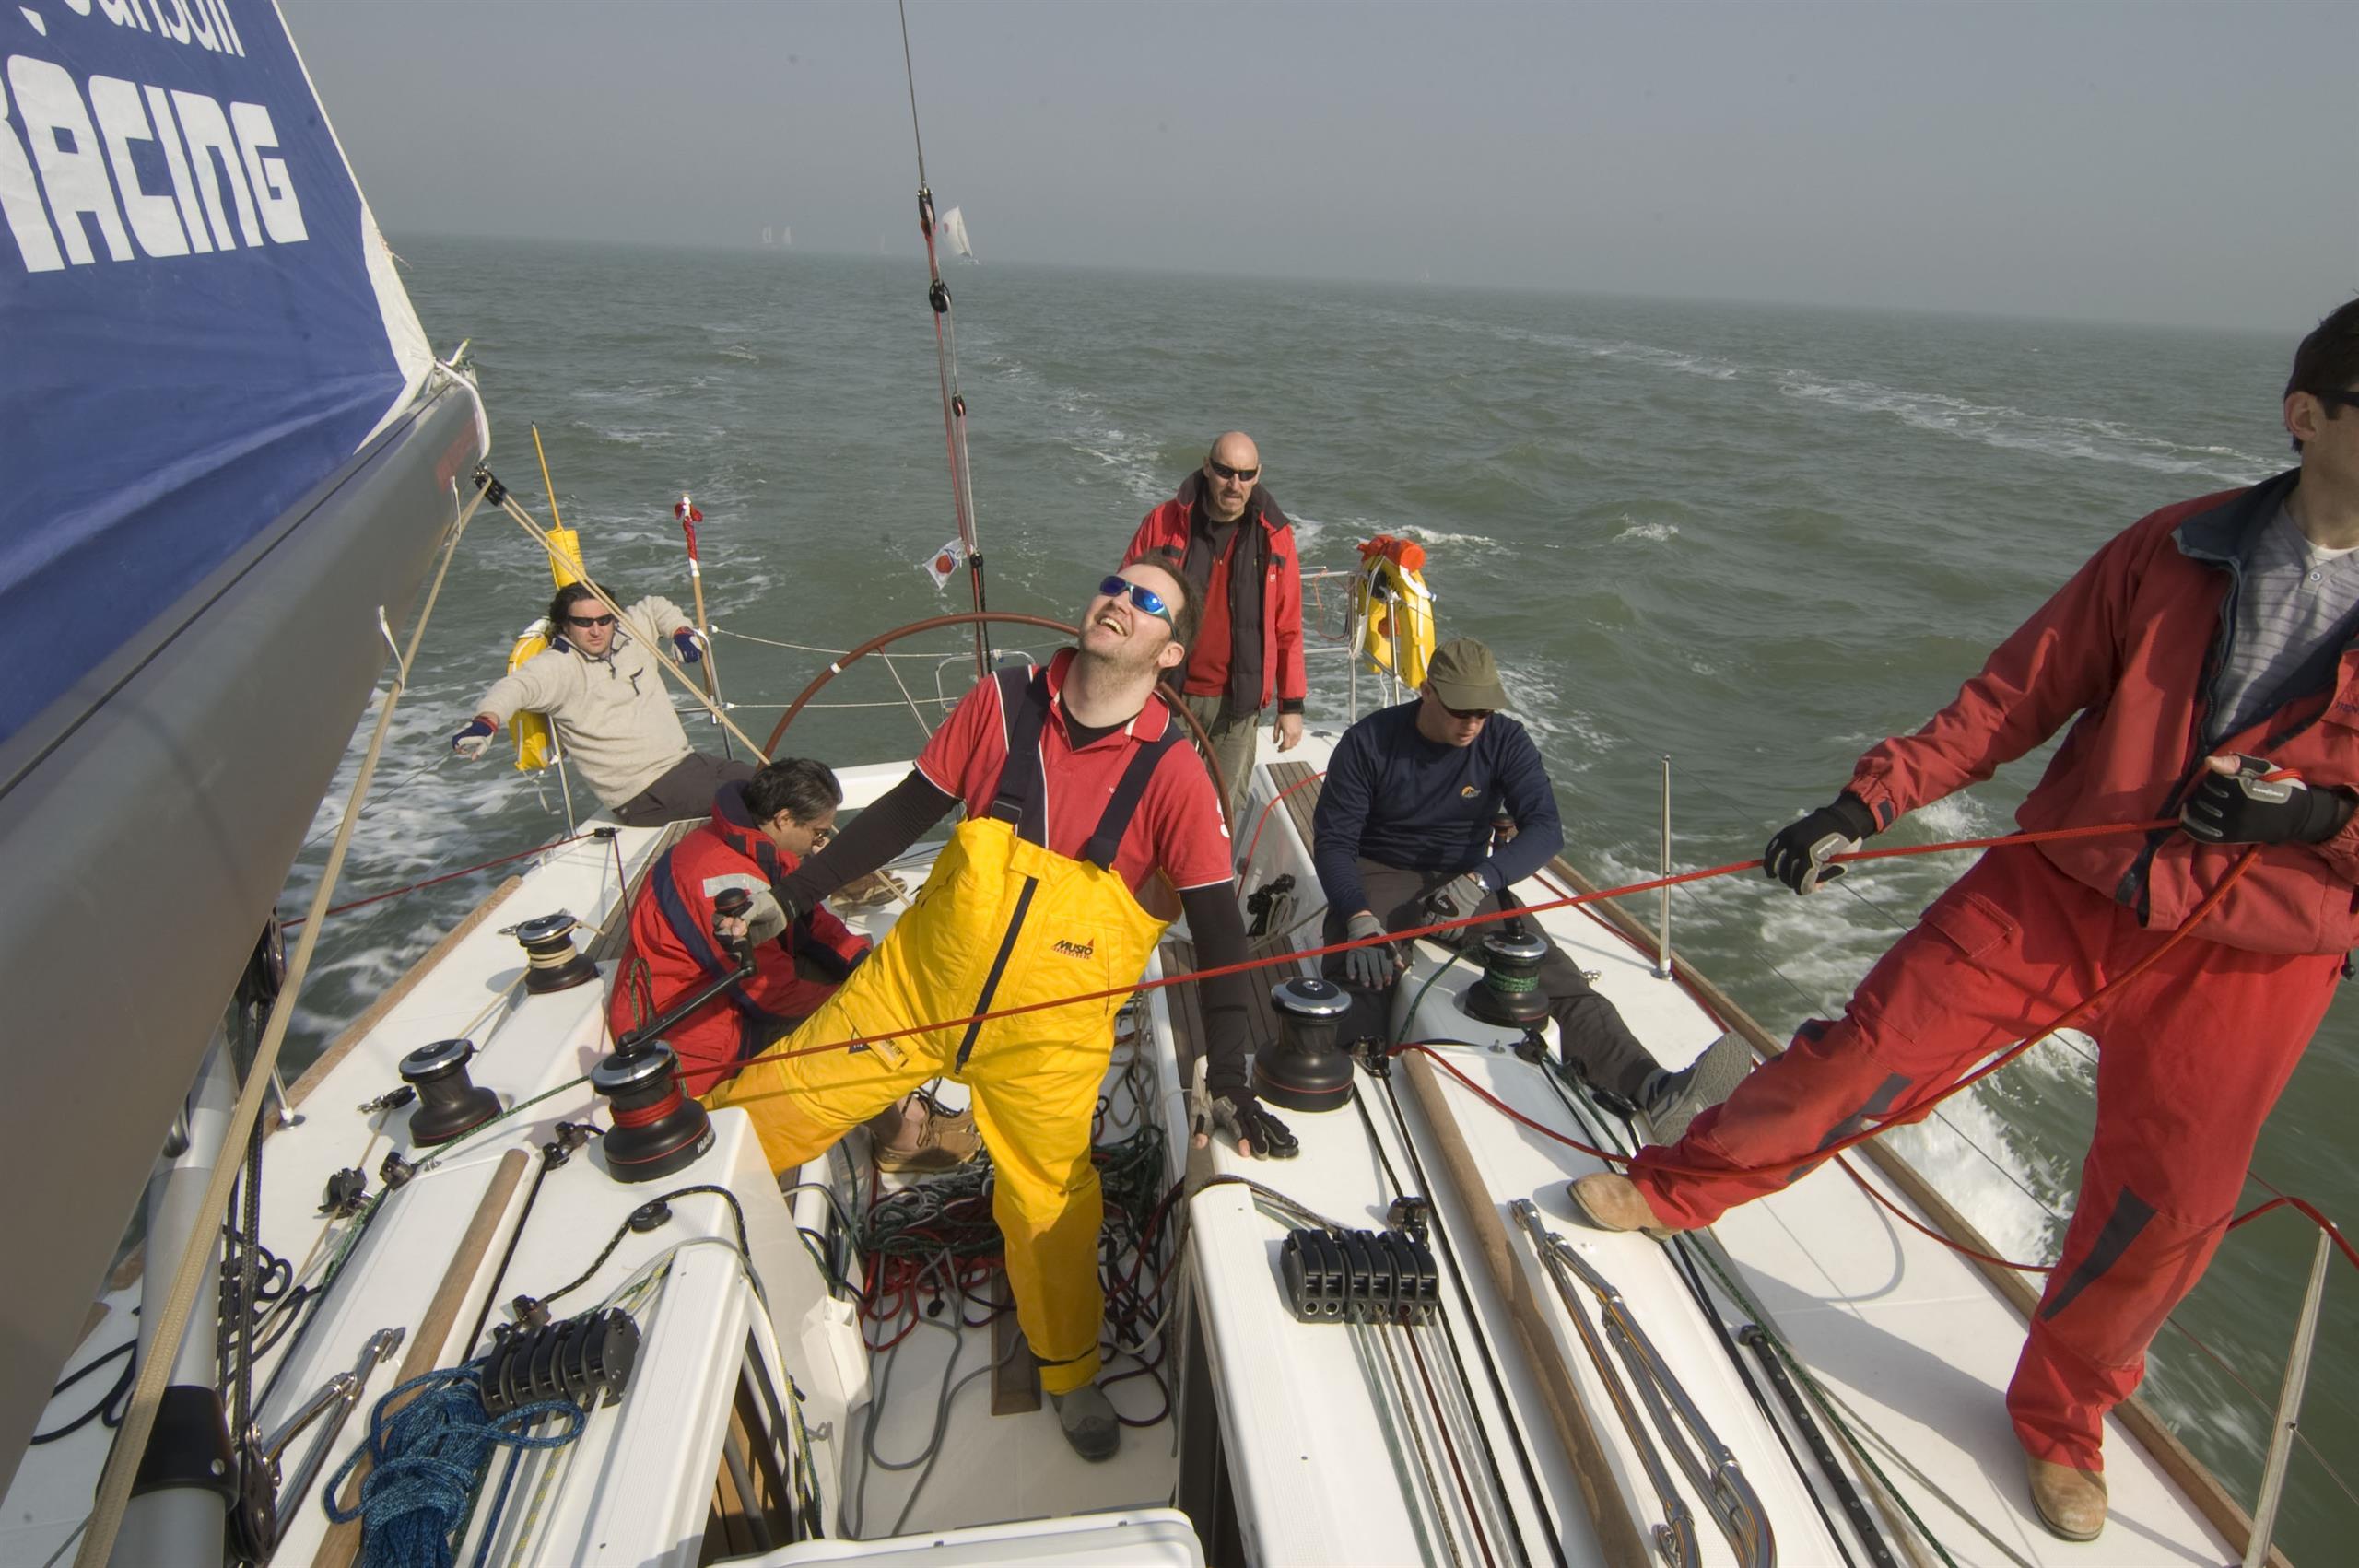 Paul offshore racing on the English Channel, UK.